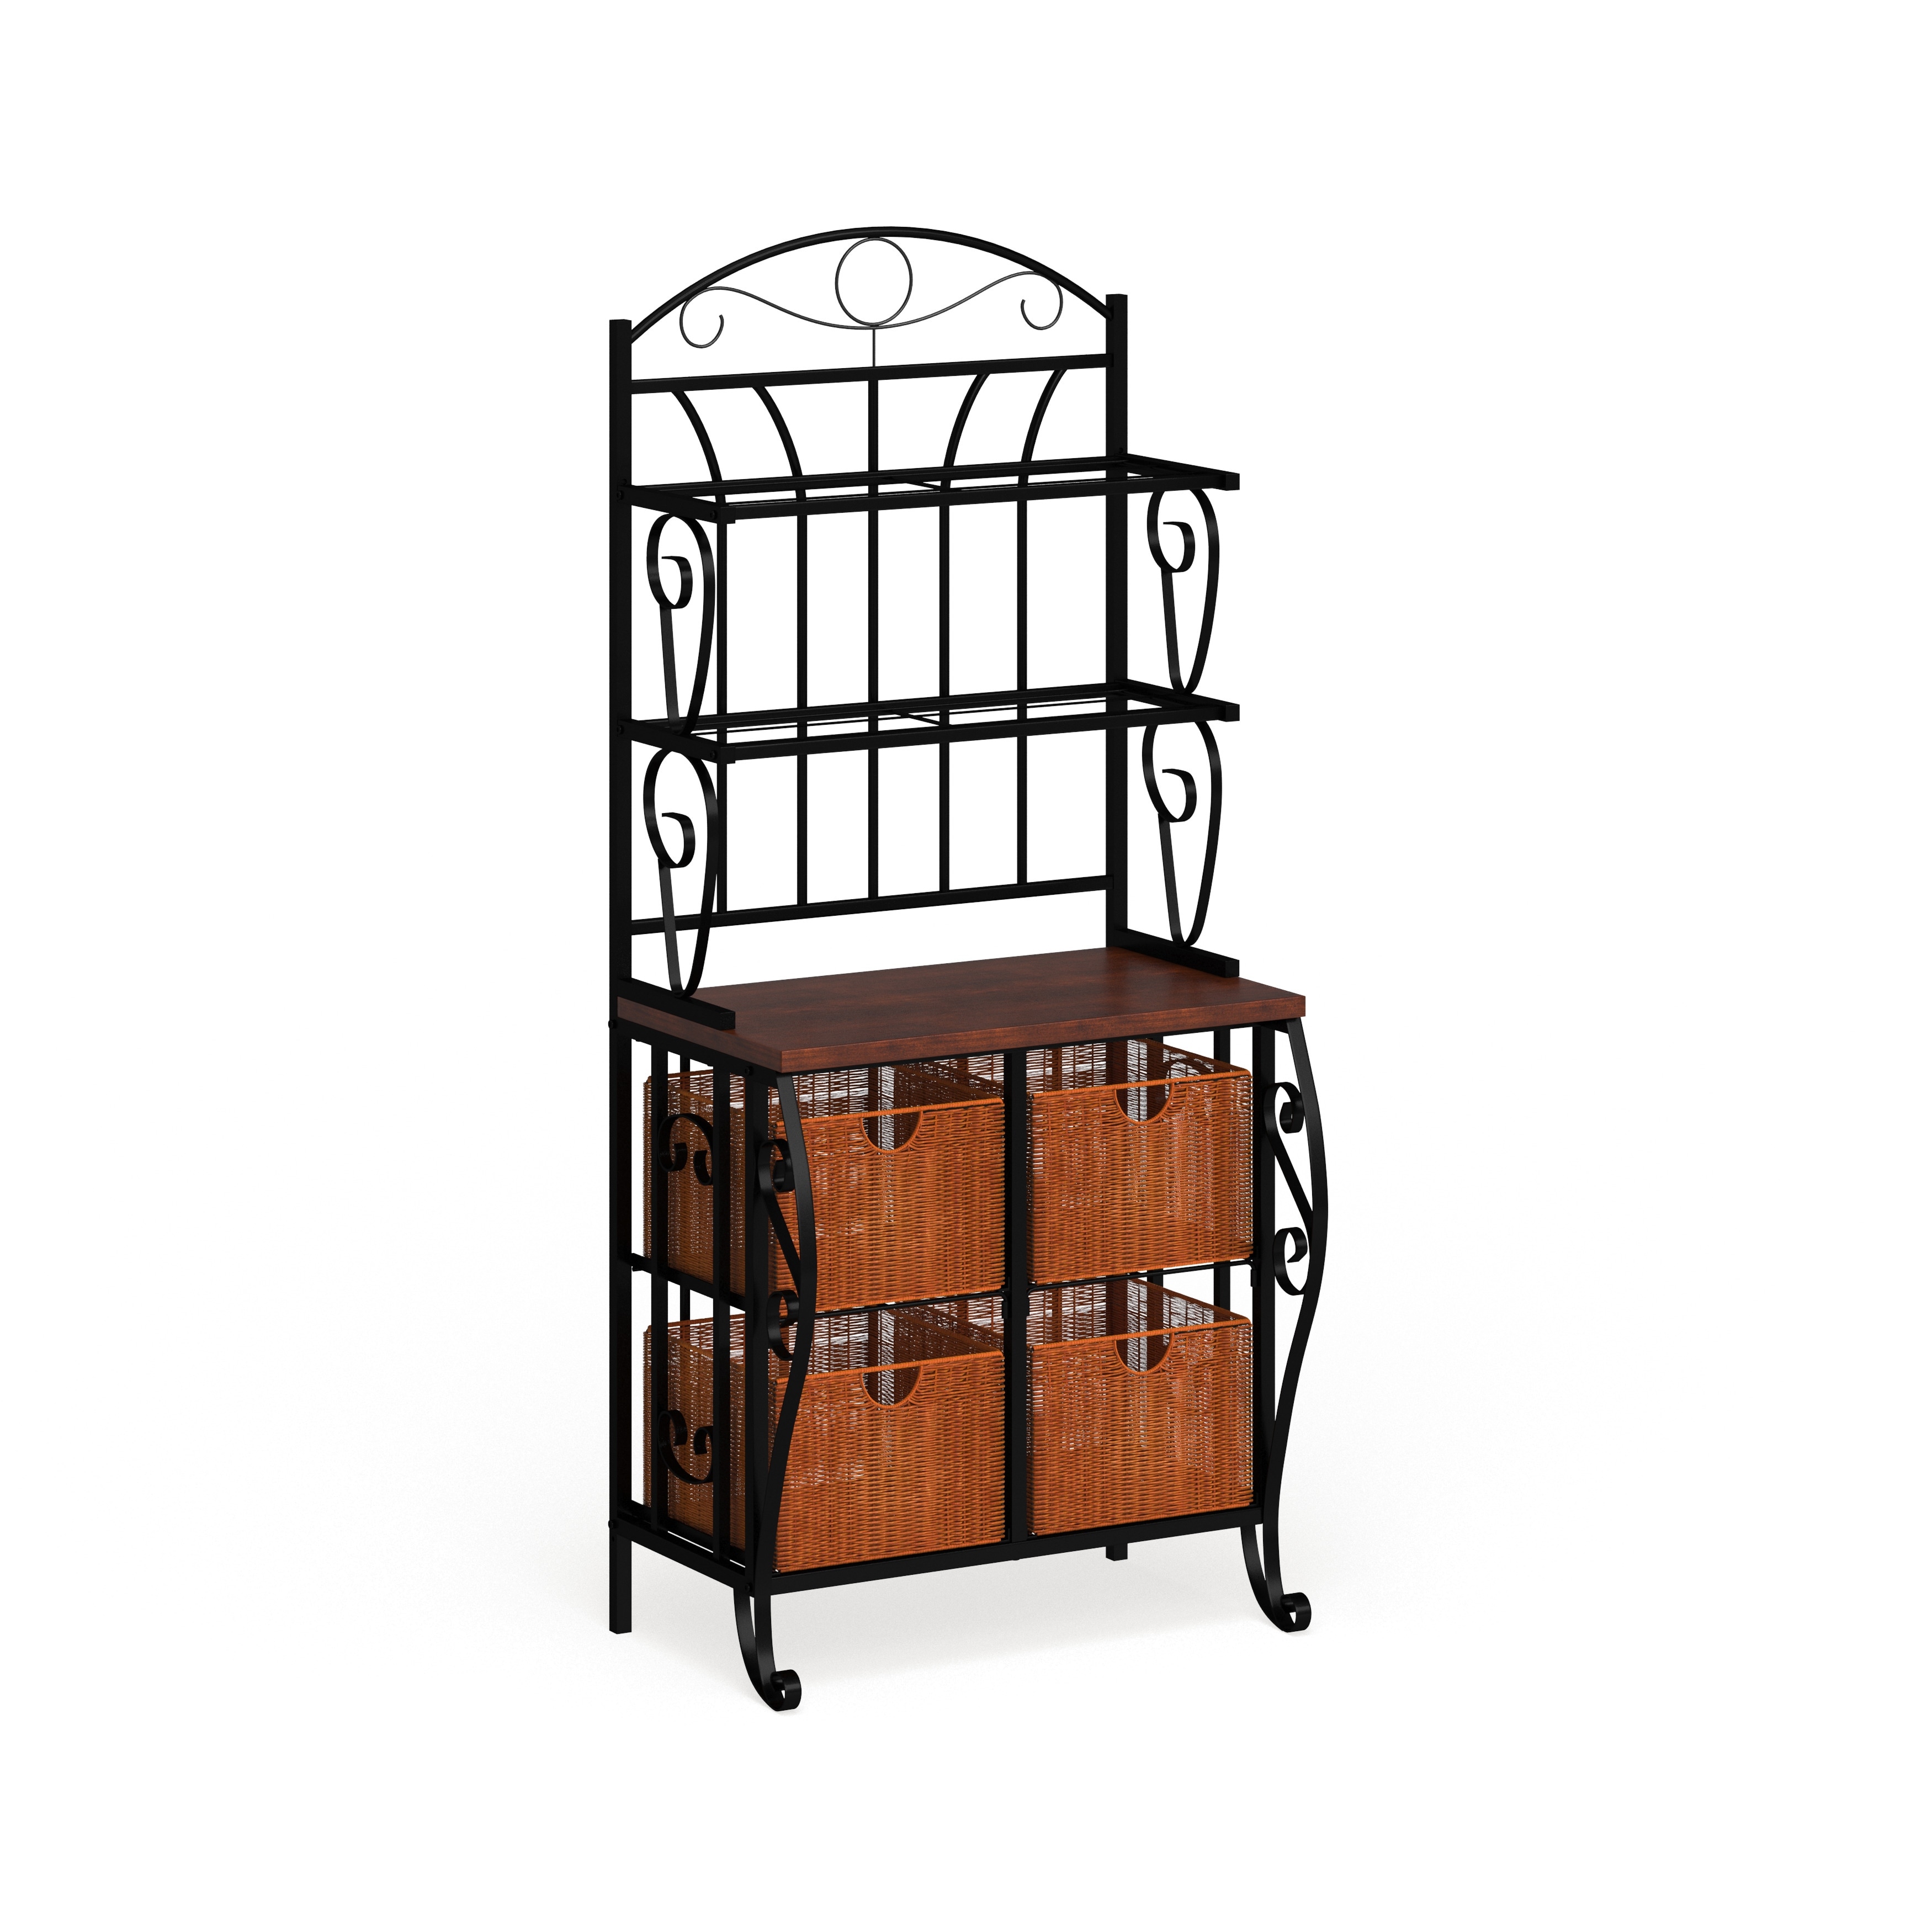 Elegant bakers rack uses Copper Grove Stoyoma Iron And Wicker Bakers Rack N A